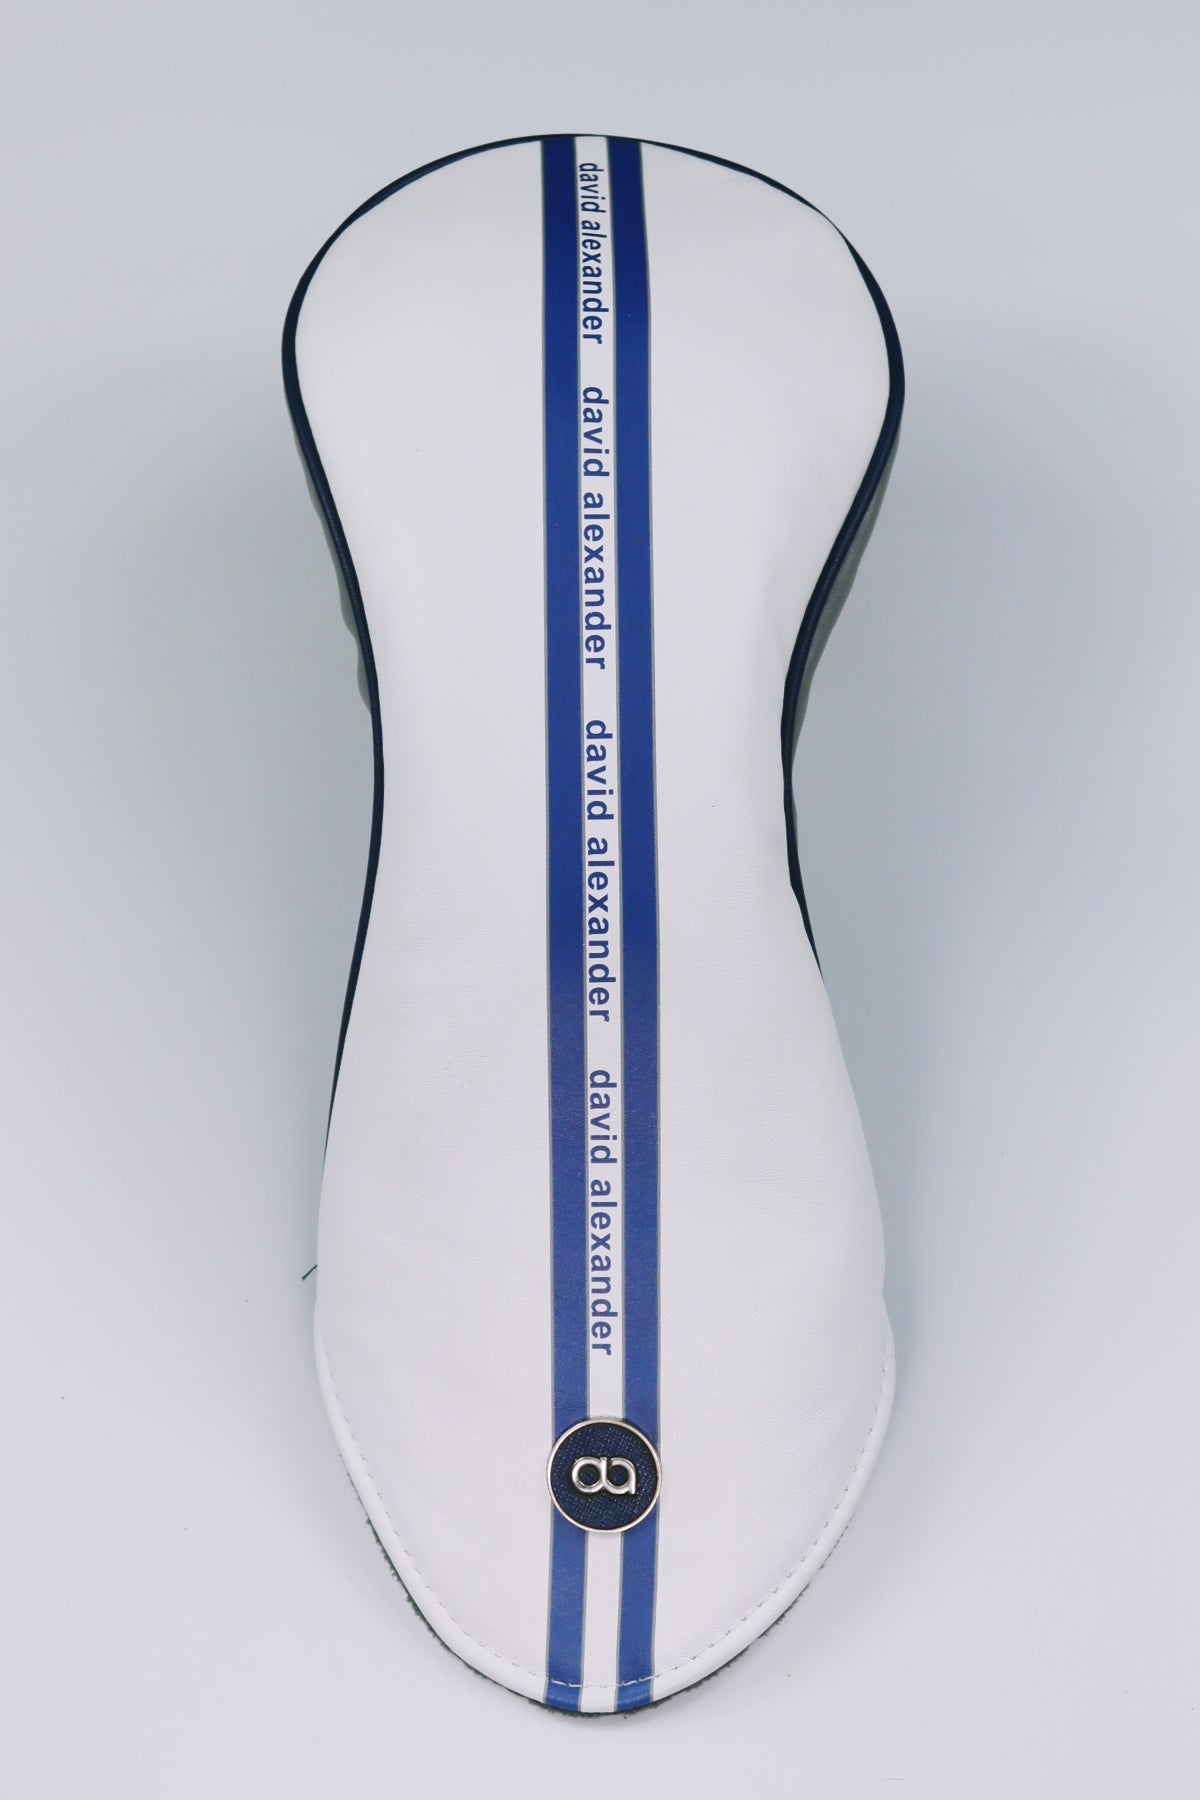 White and blue leather driver head-cover by David Alexander